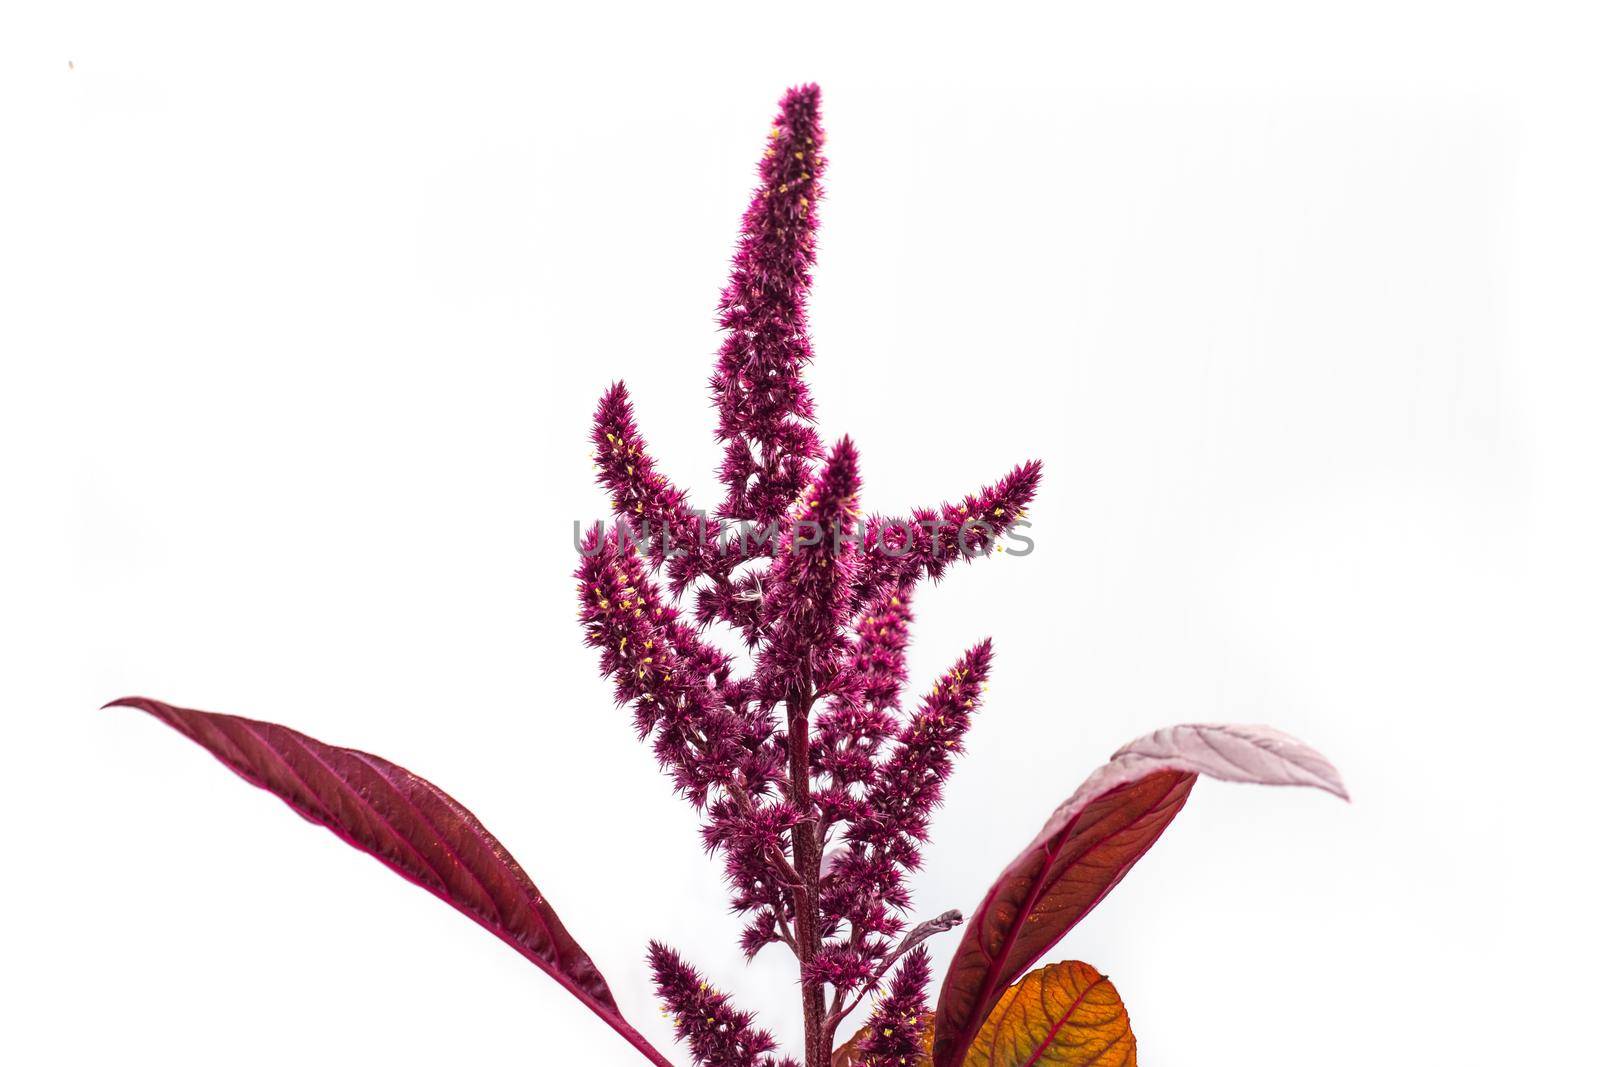 Flowers with seeds of vegetable amaranth on a white background by levnat09